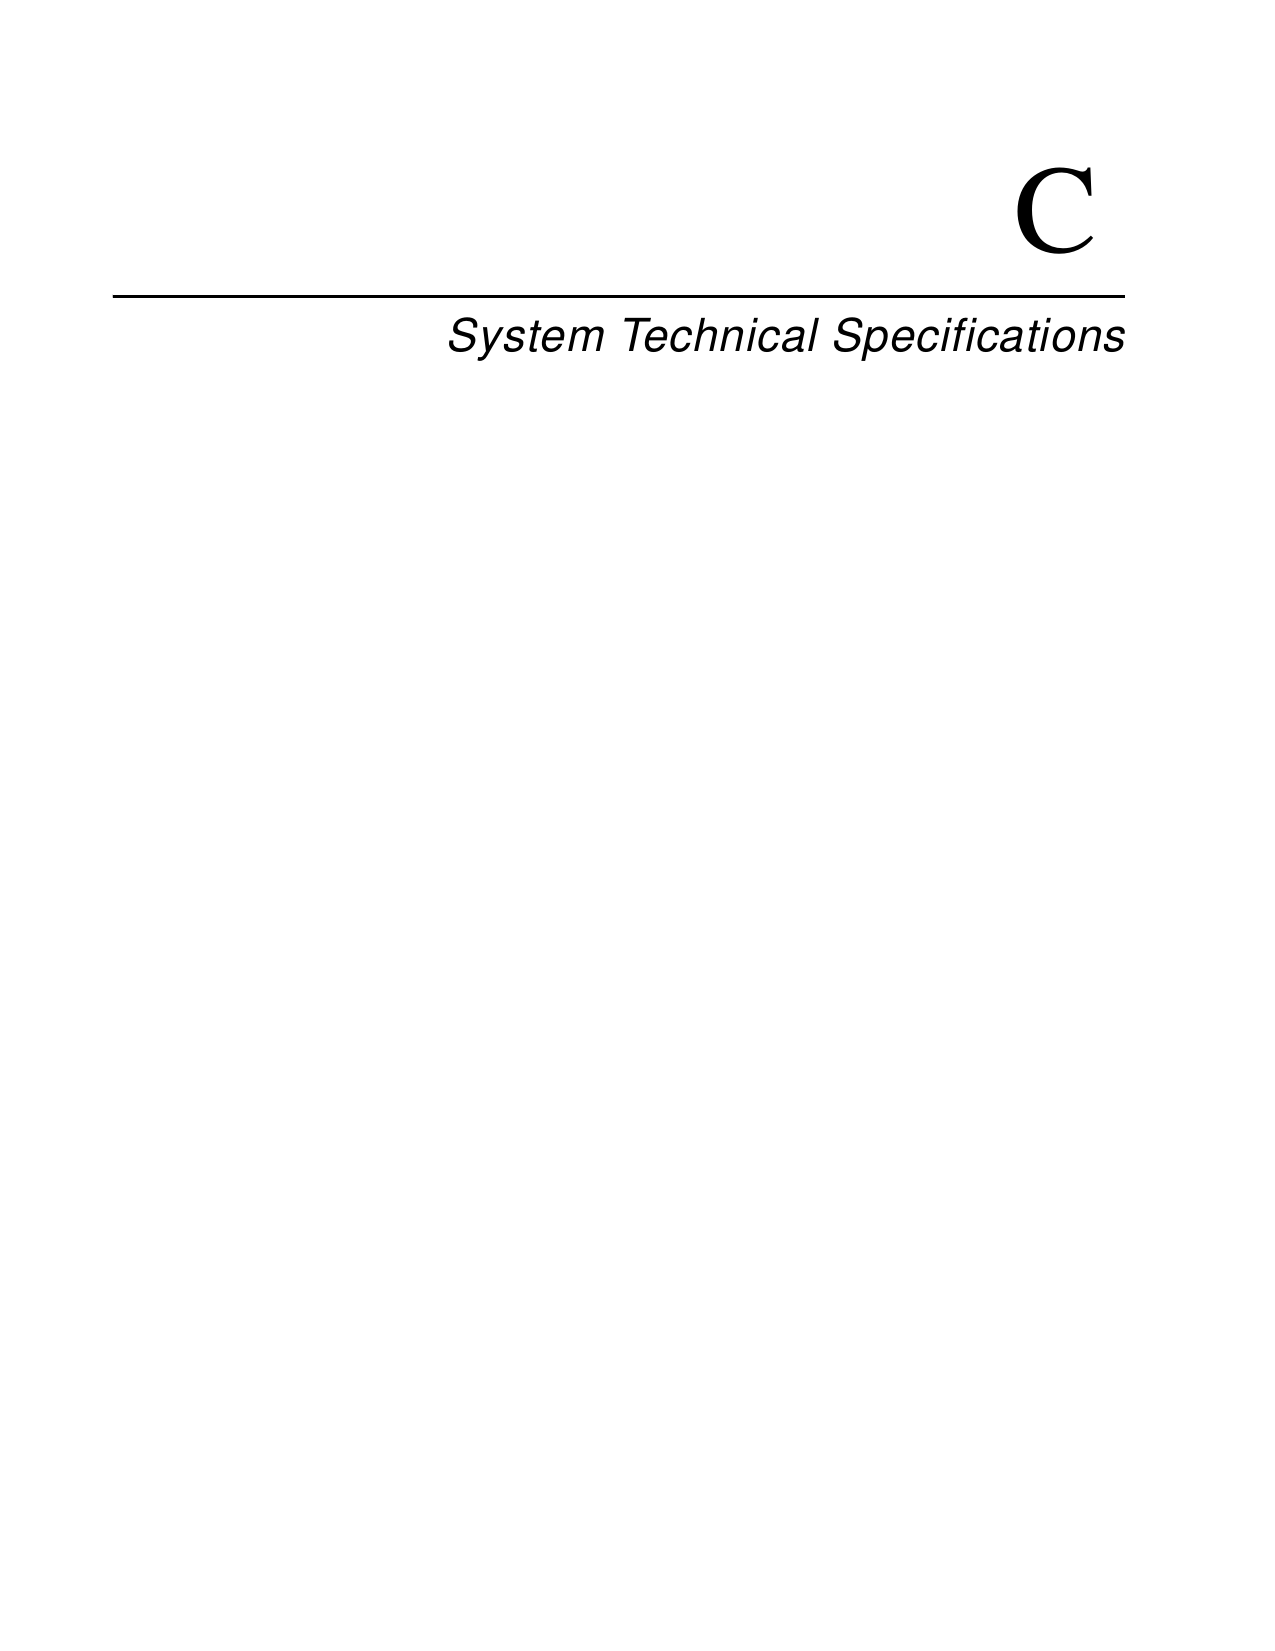 CSystem Technical Specifications